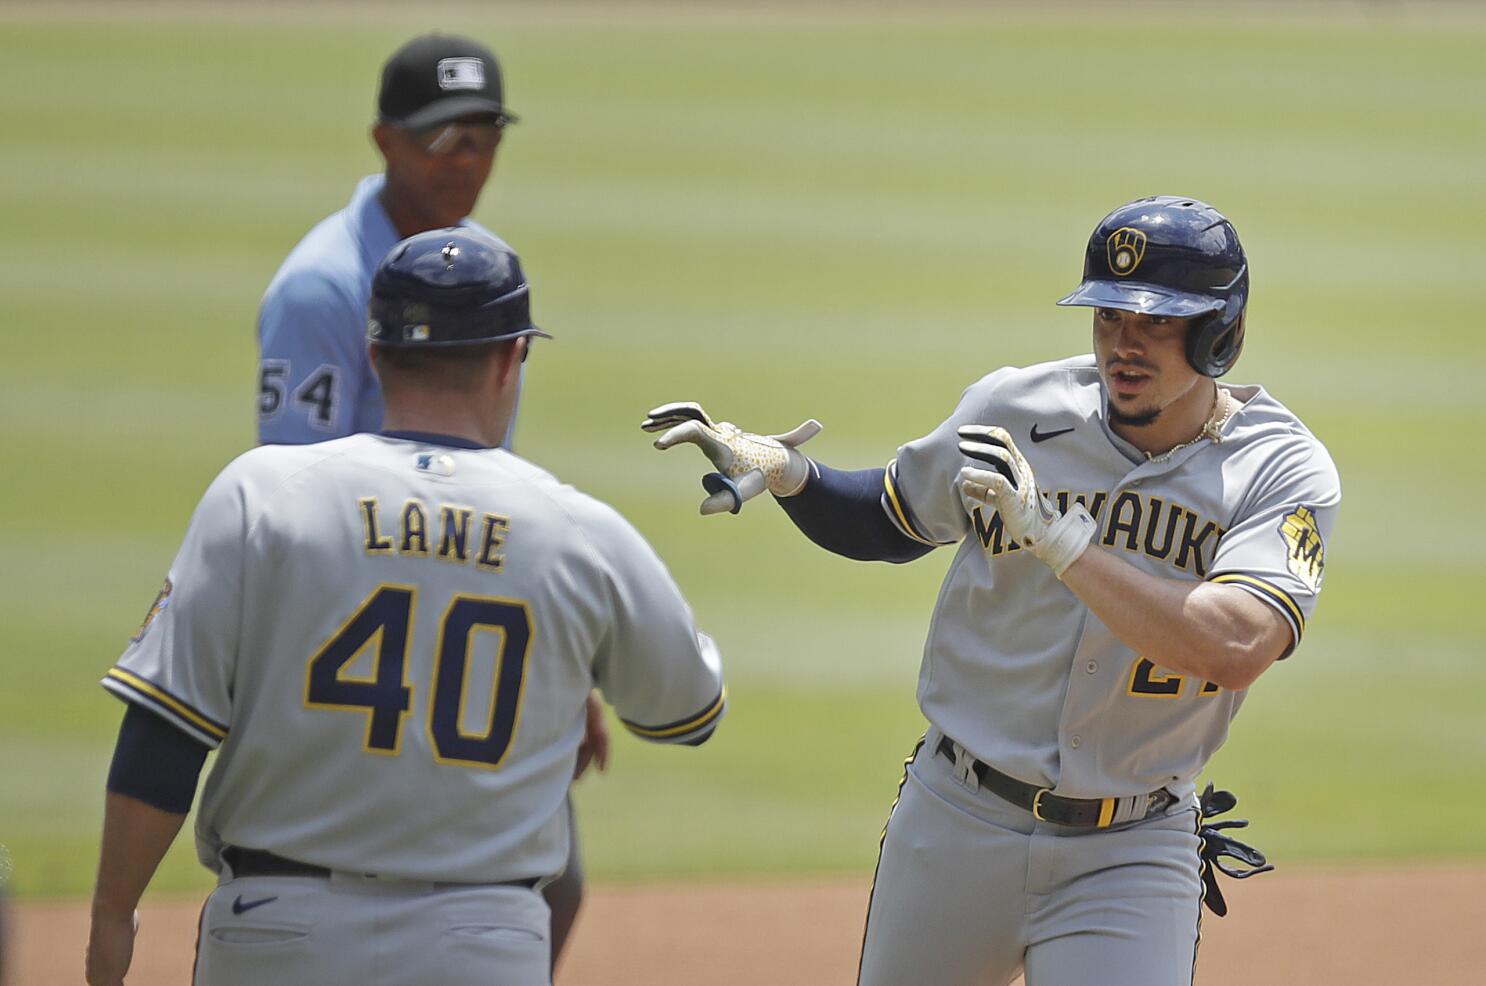 Braves acquire infielder Arcia from Brewers for 2 pitchers